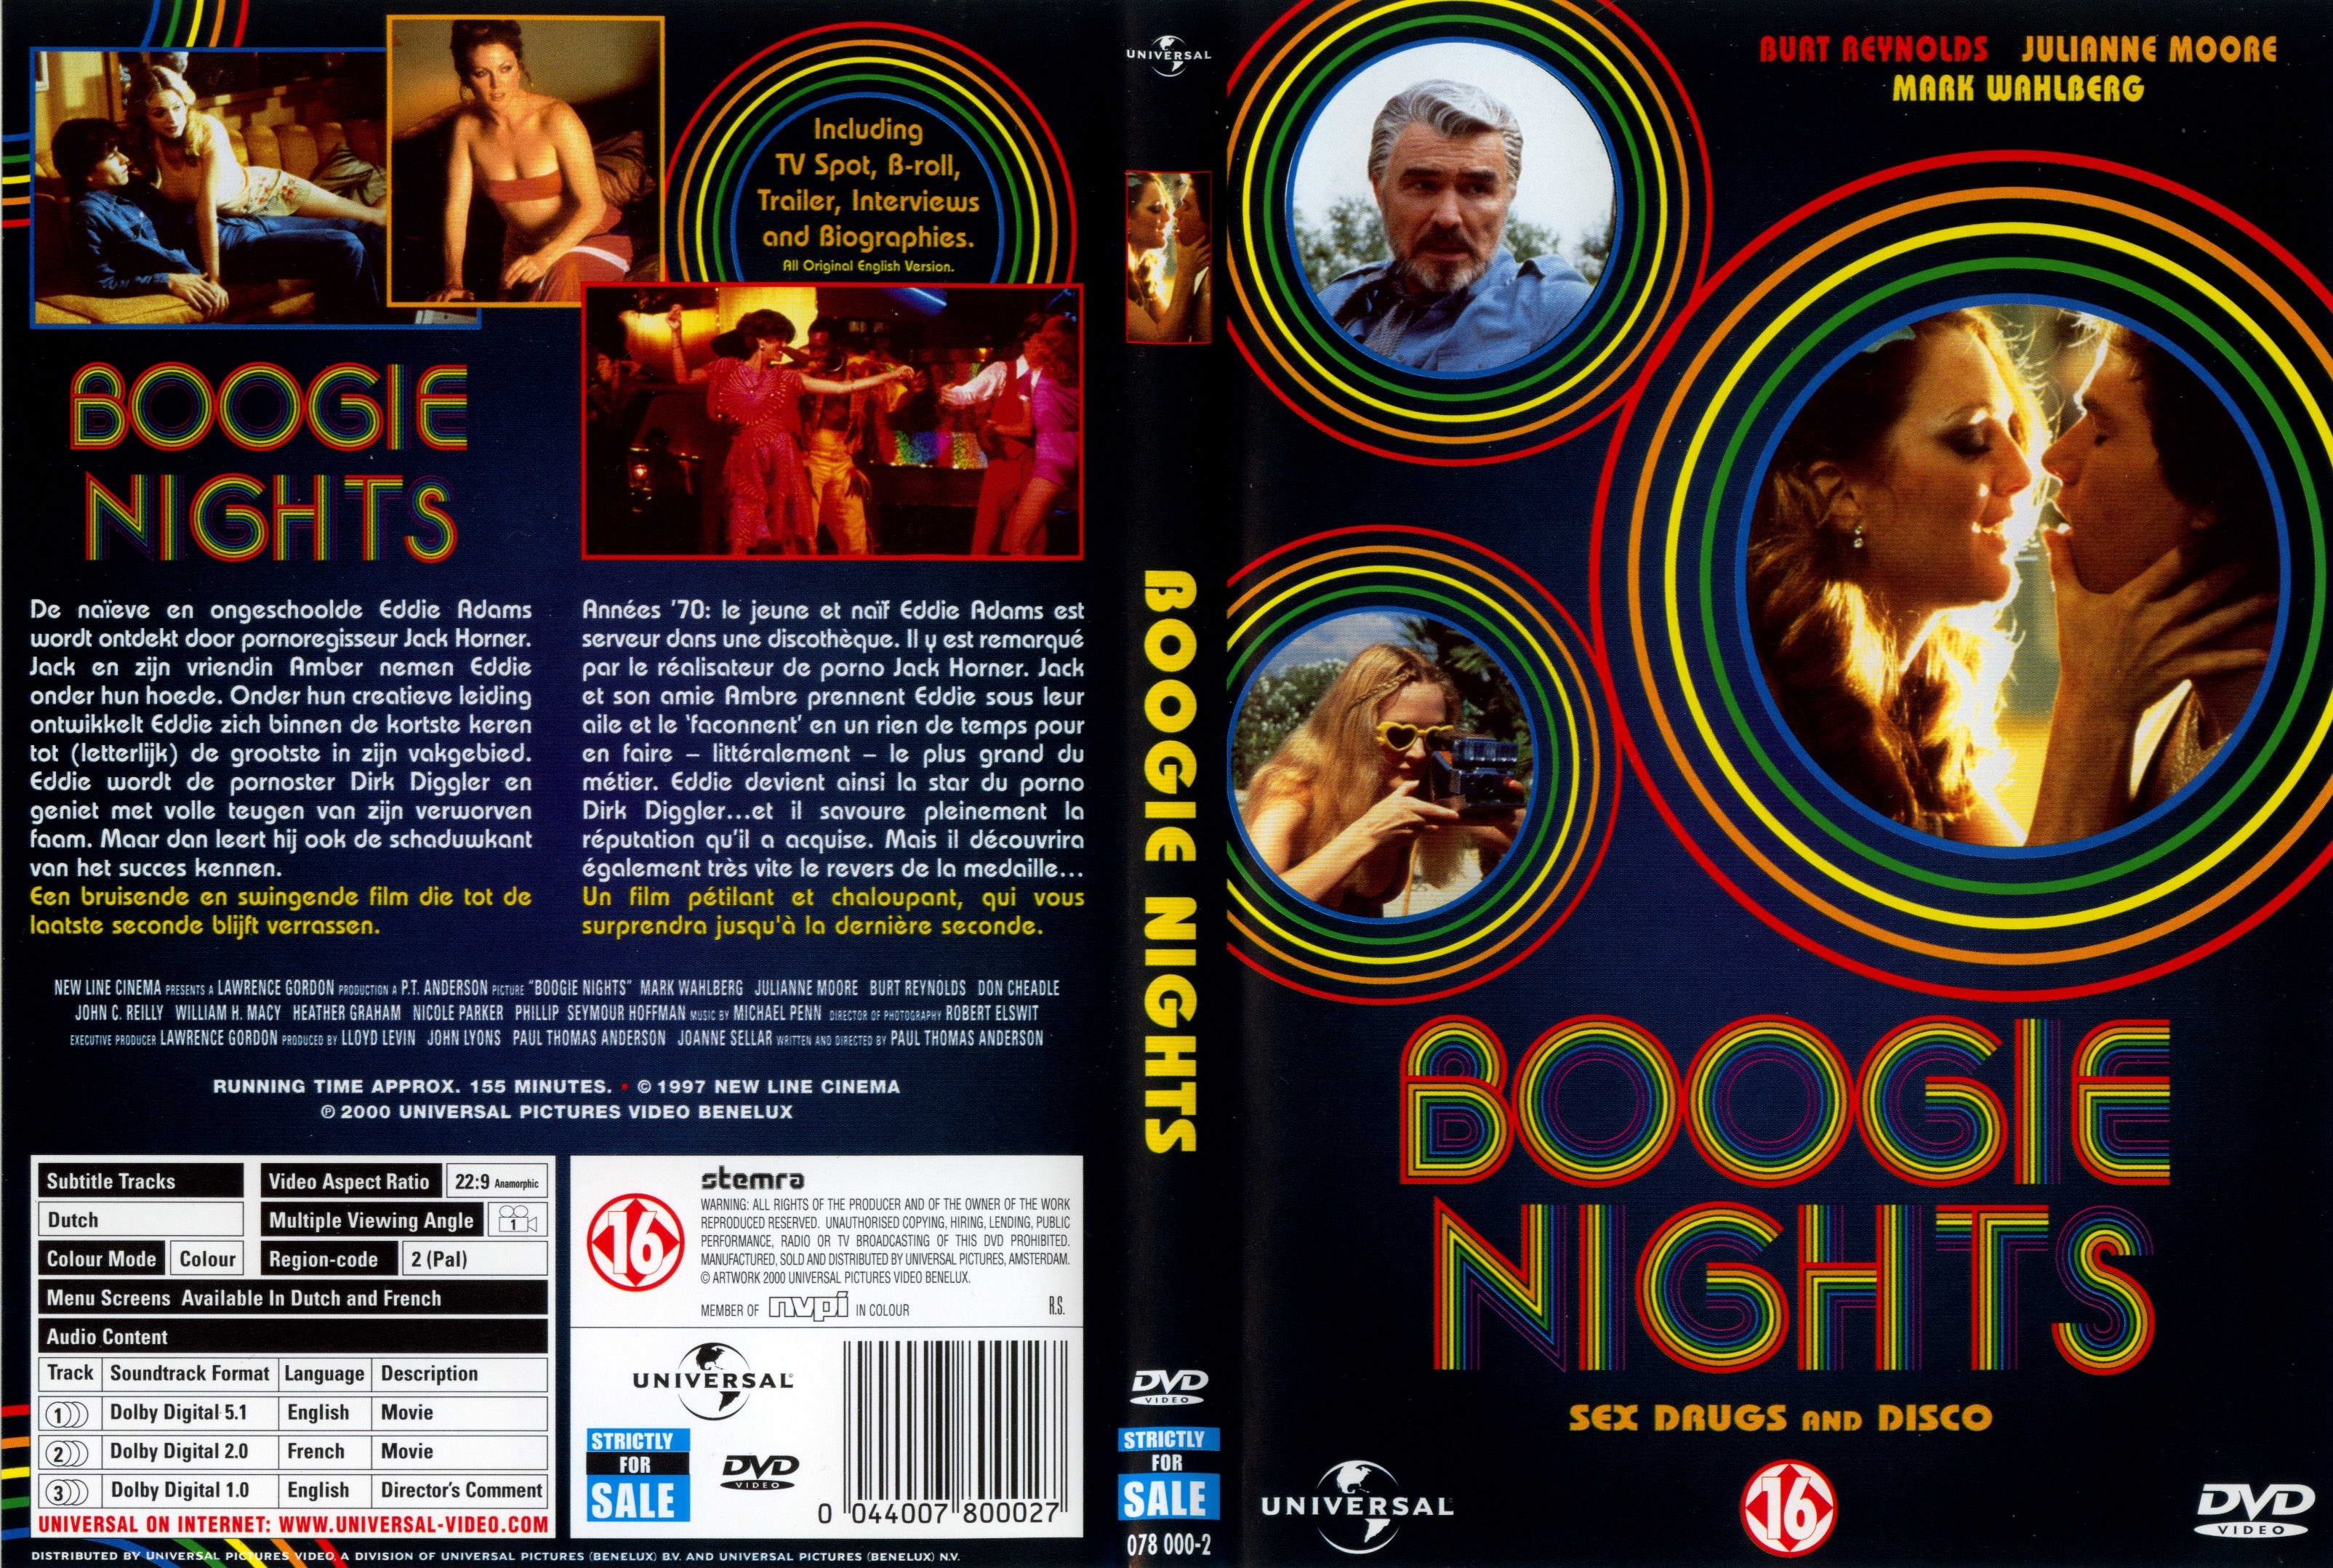 Jaquette DVD Boogie nights